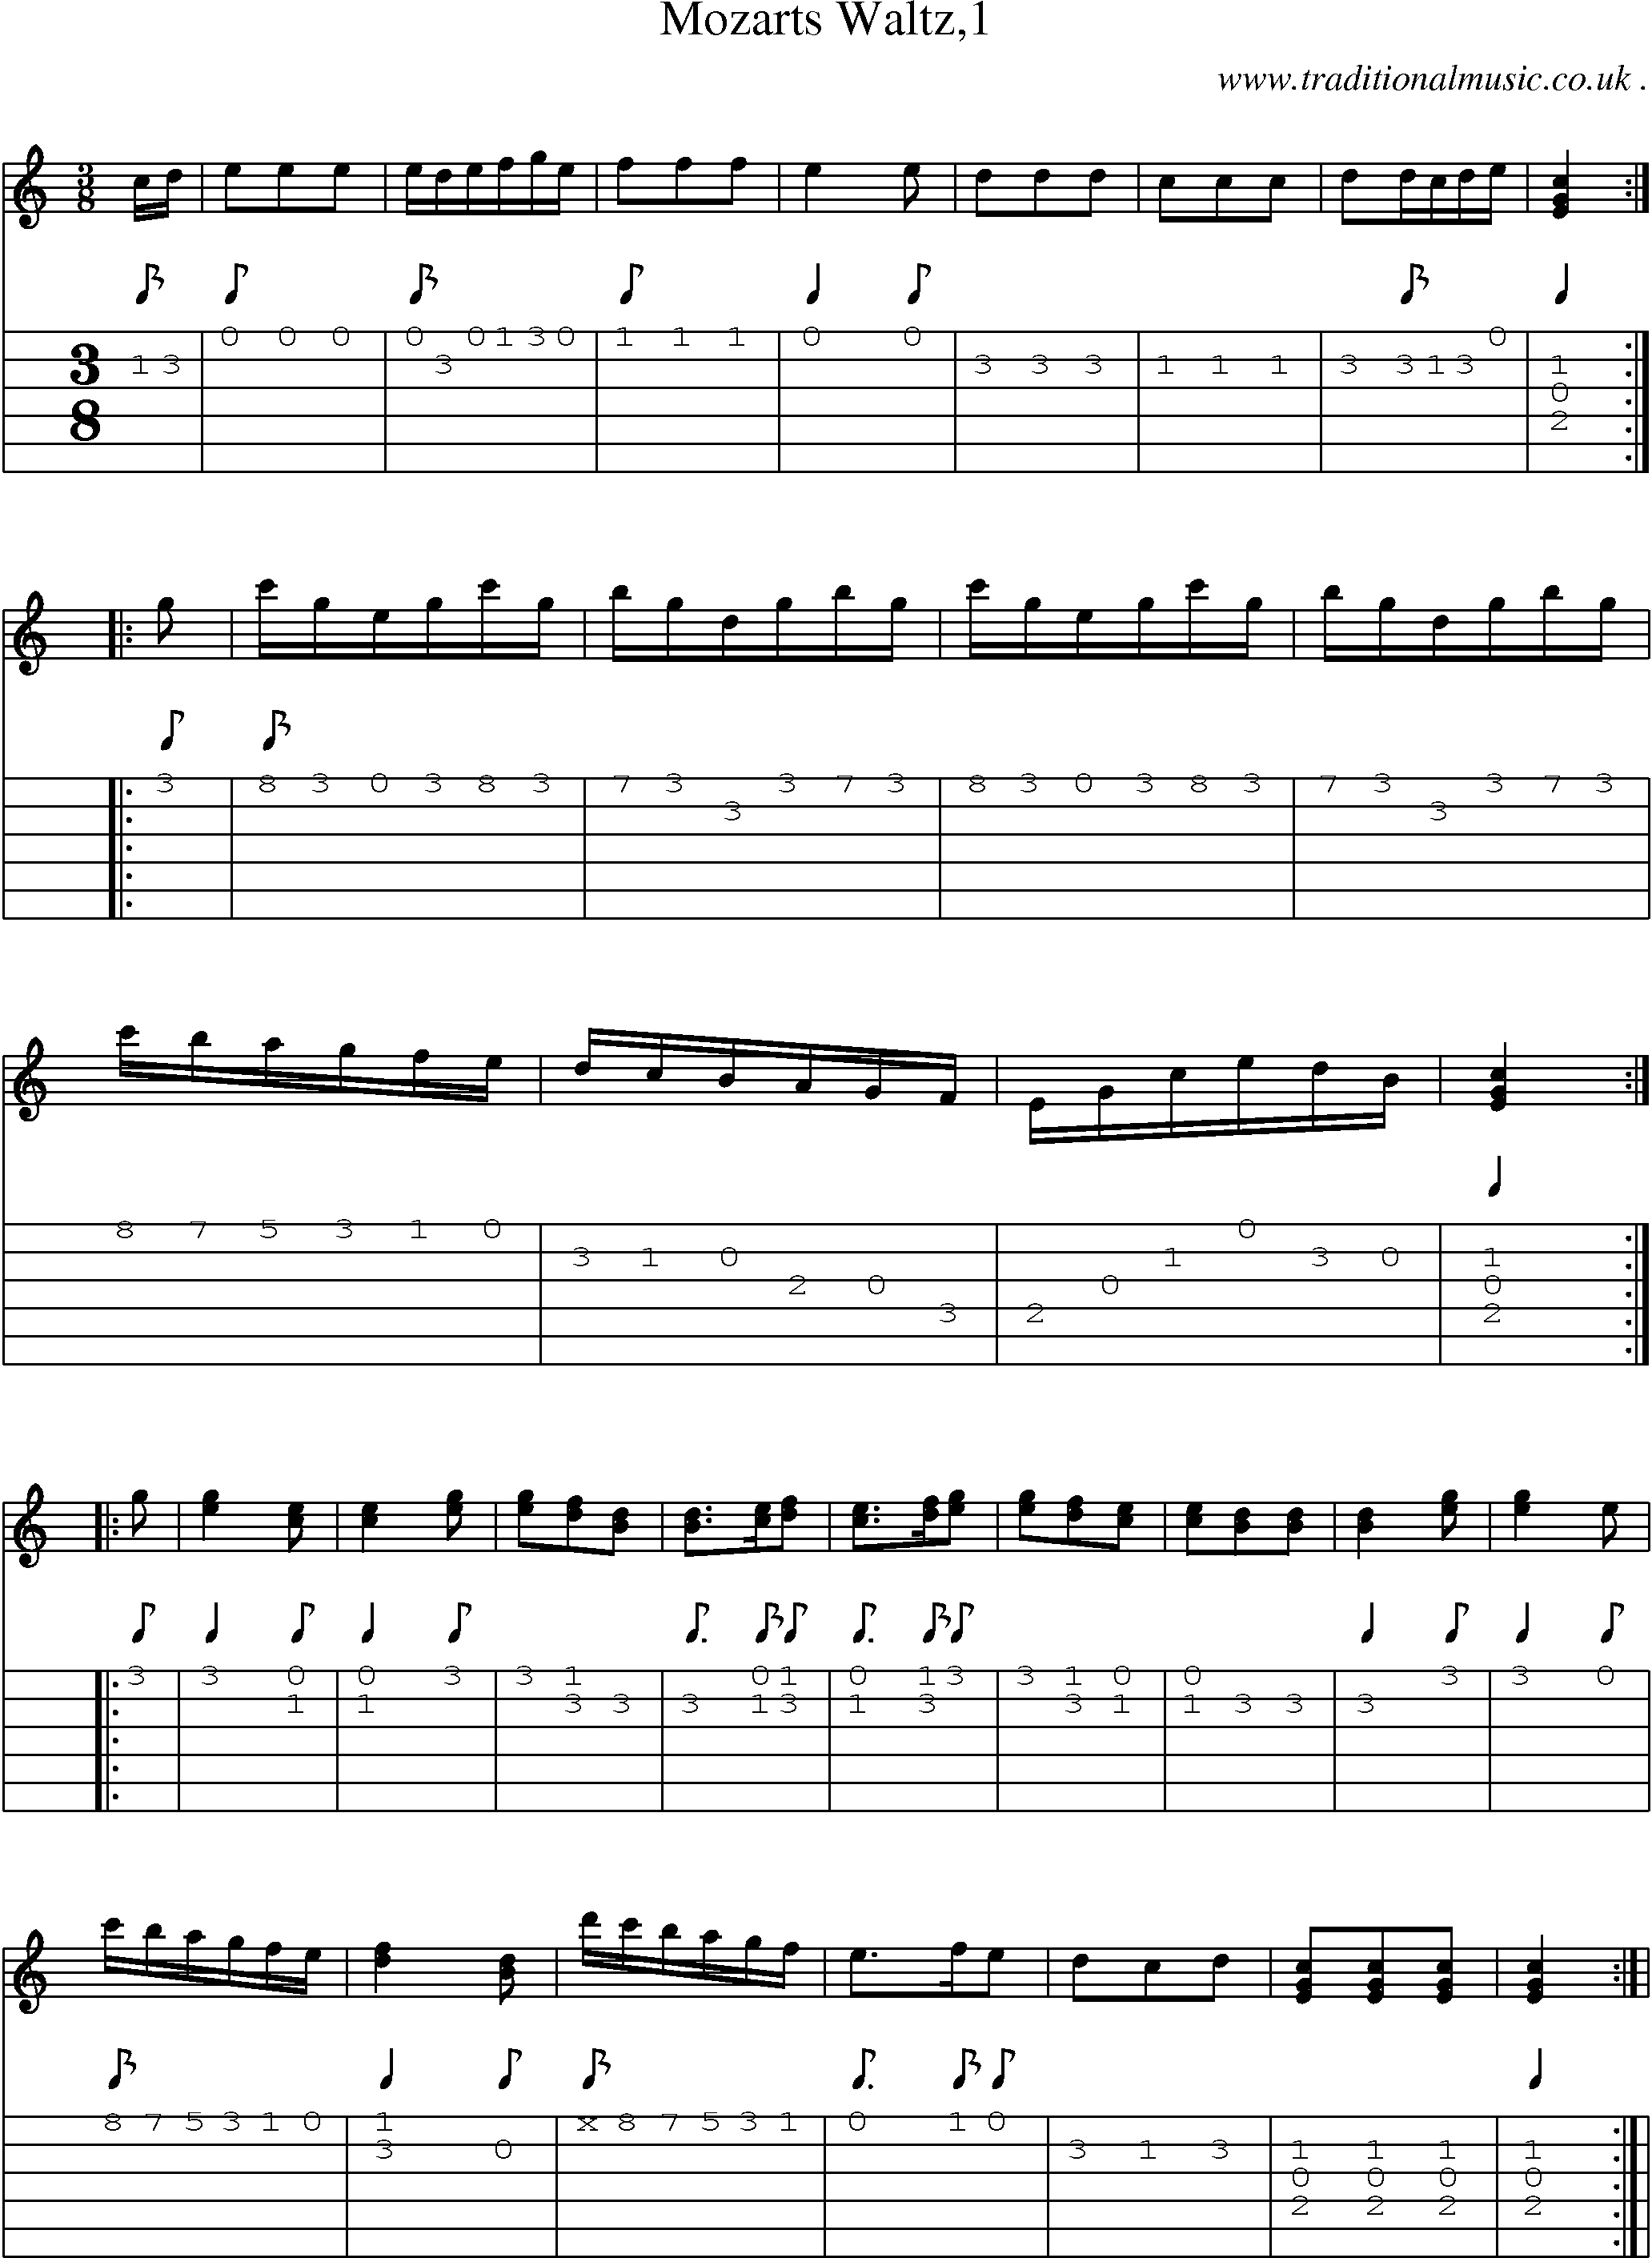 Sheet-Music and Guitar Tabs for Mozarts Waltz1